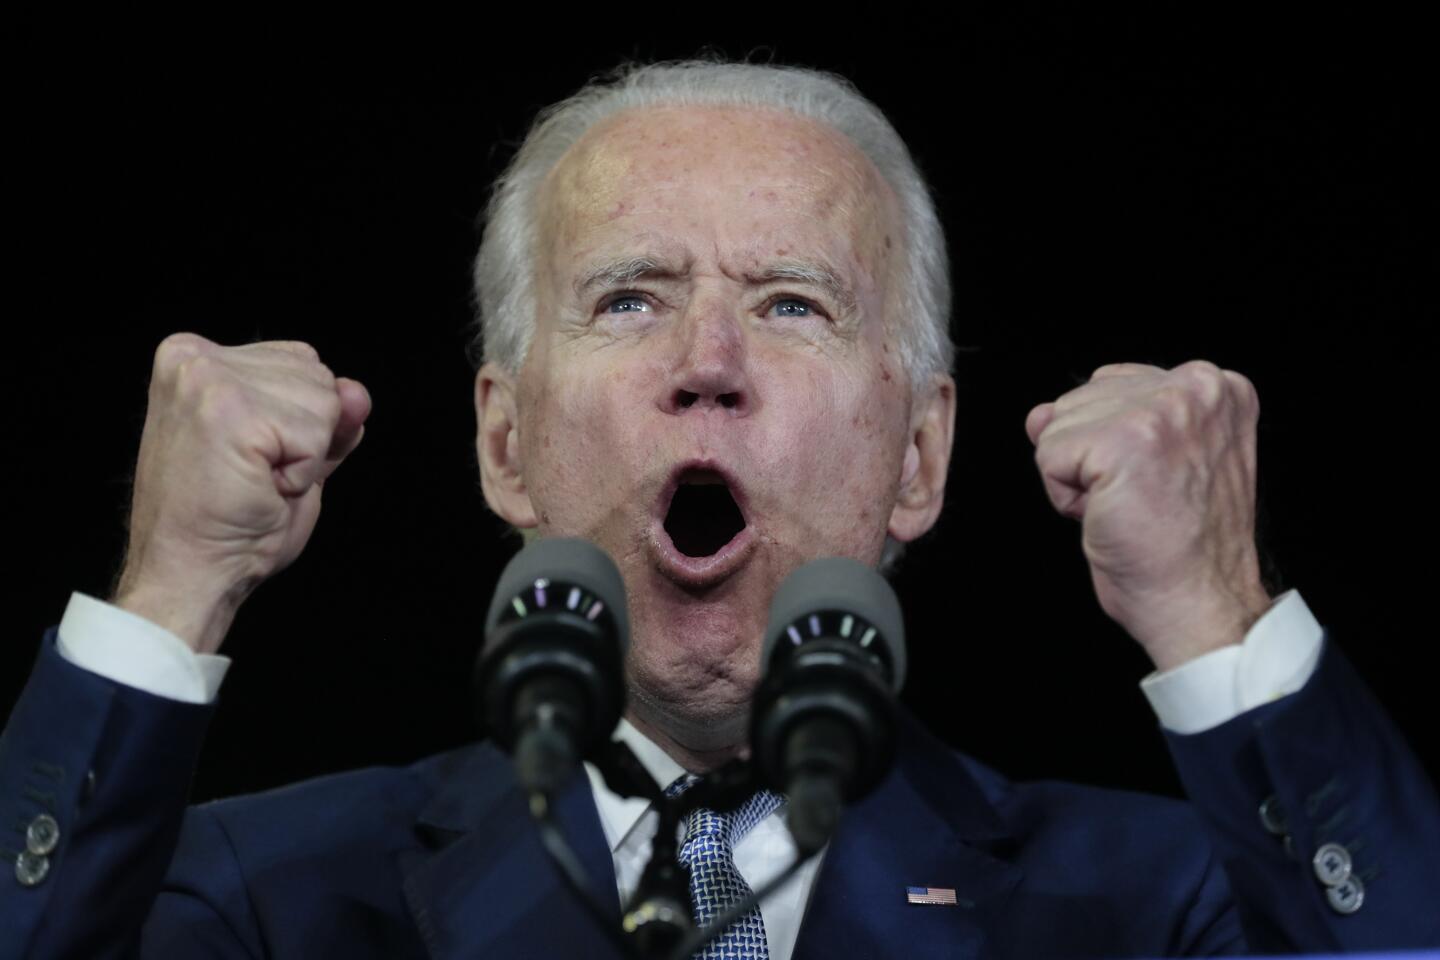 Joe Biden reacts to Super Tuesday voting results.